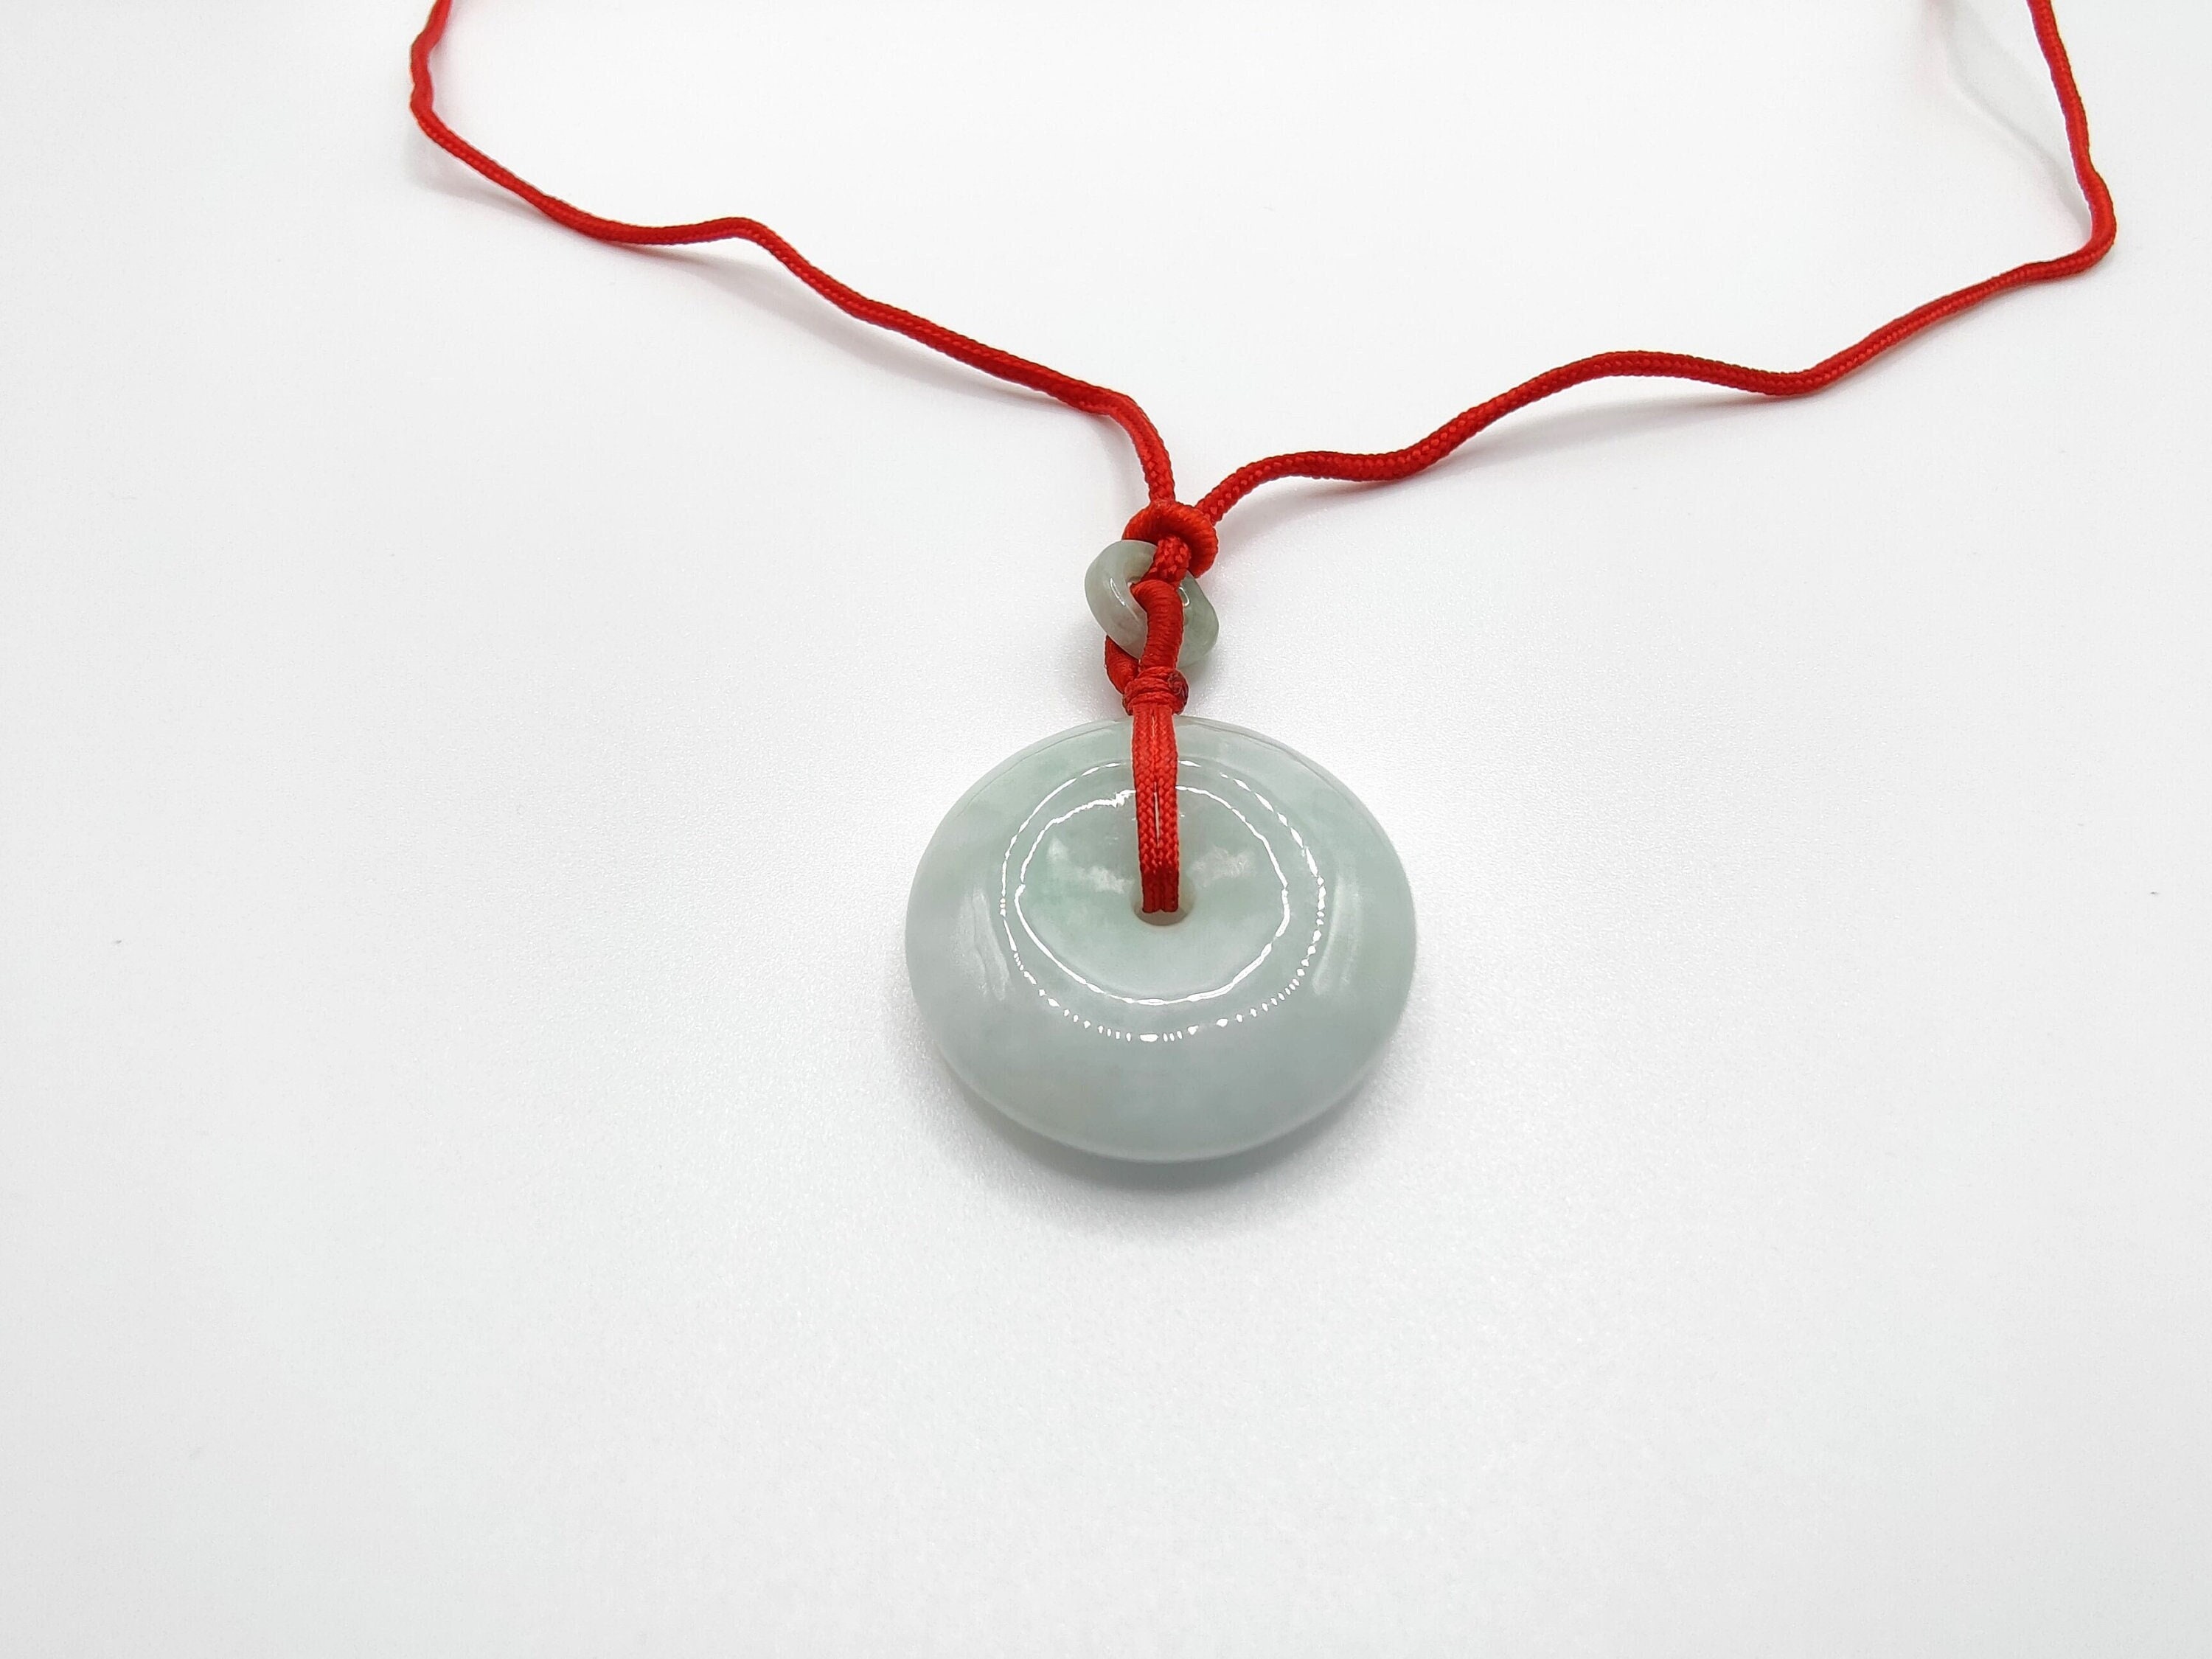 An Istone Chinese jade pendant, depicting a Buddha, on red string strand,  4.5cm high, with